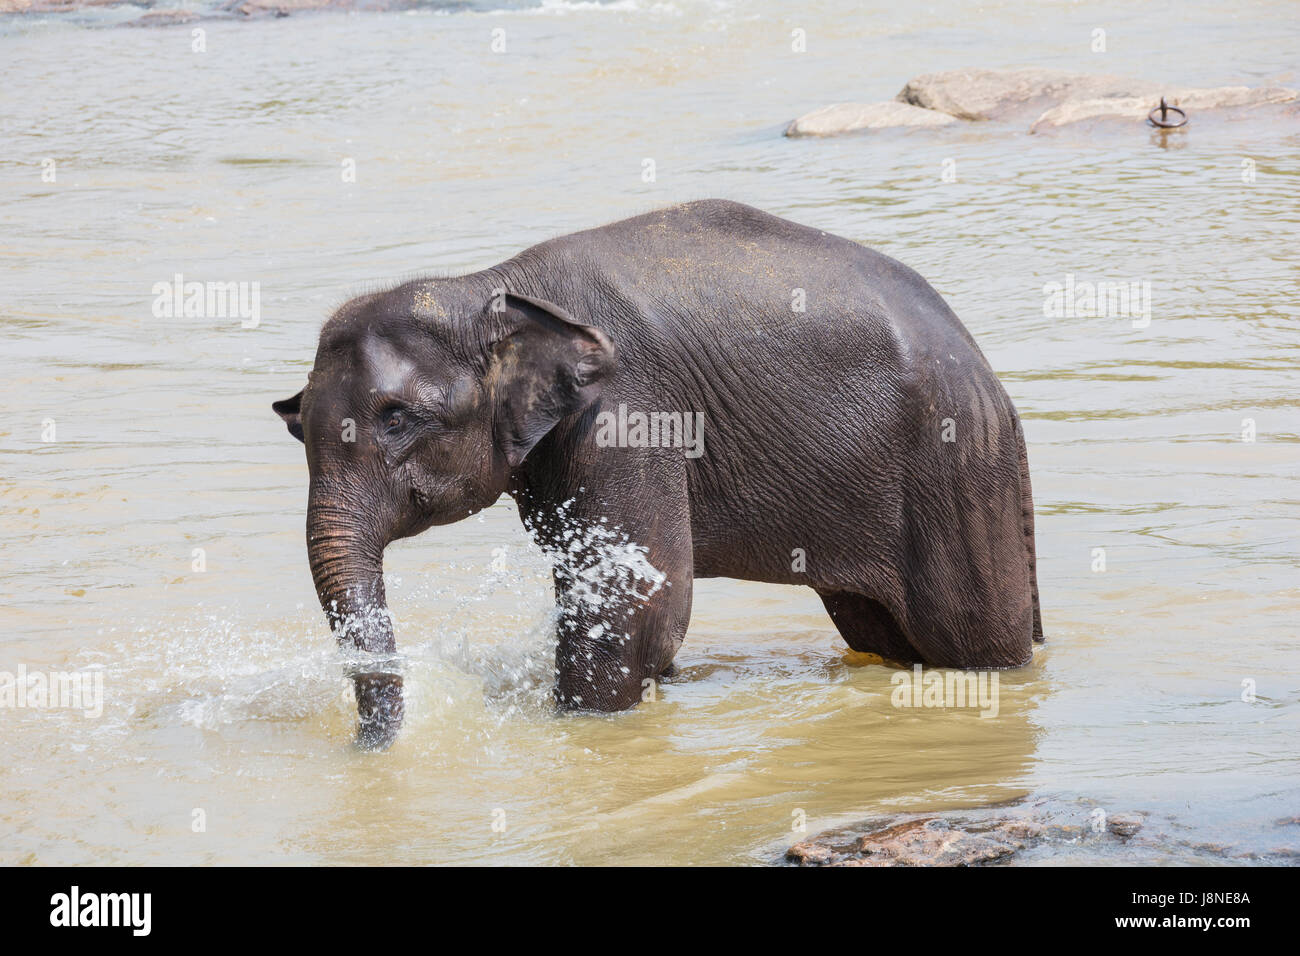 Elephant splashing with water in the river. Selective focus on the animal with some motion blur. Stock Photo